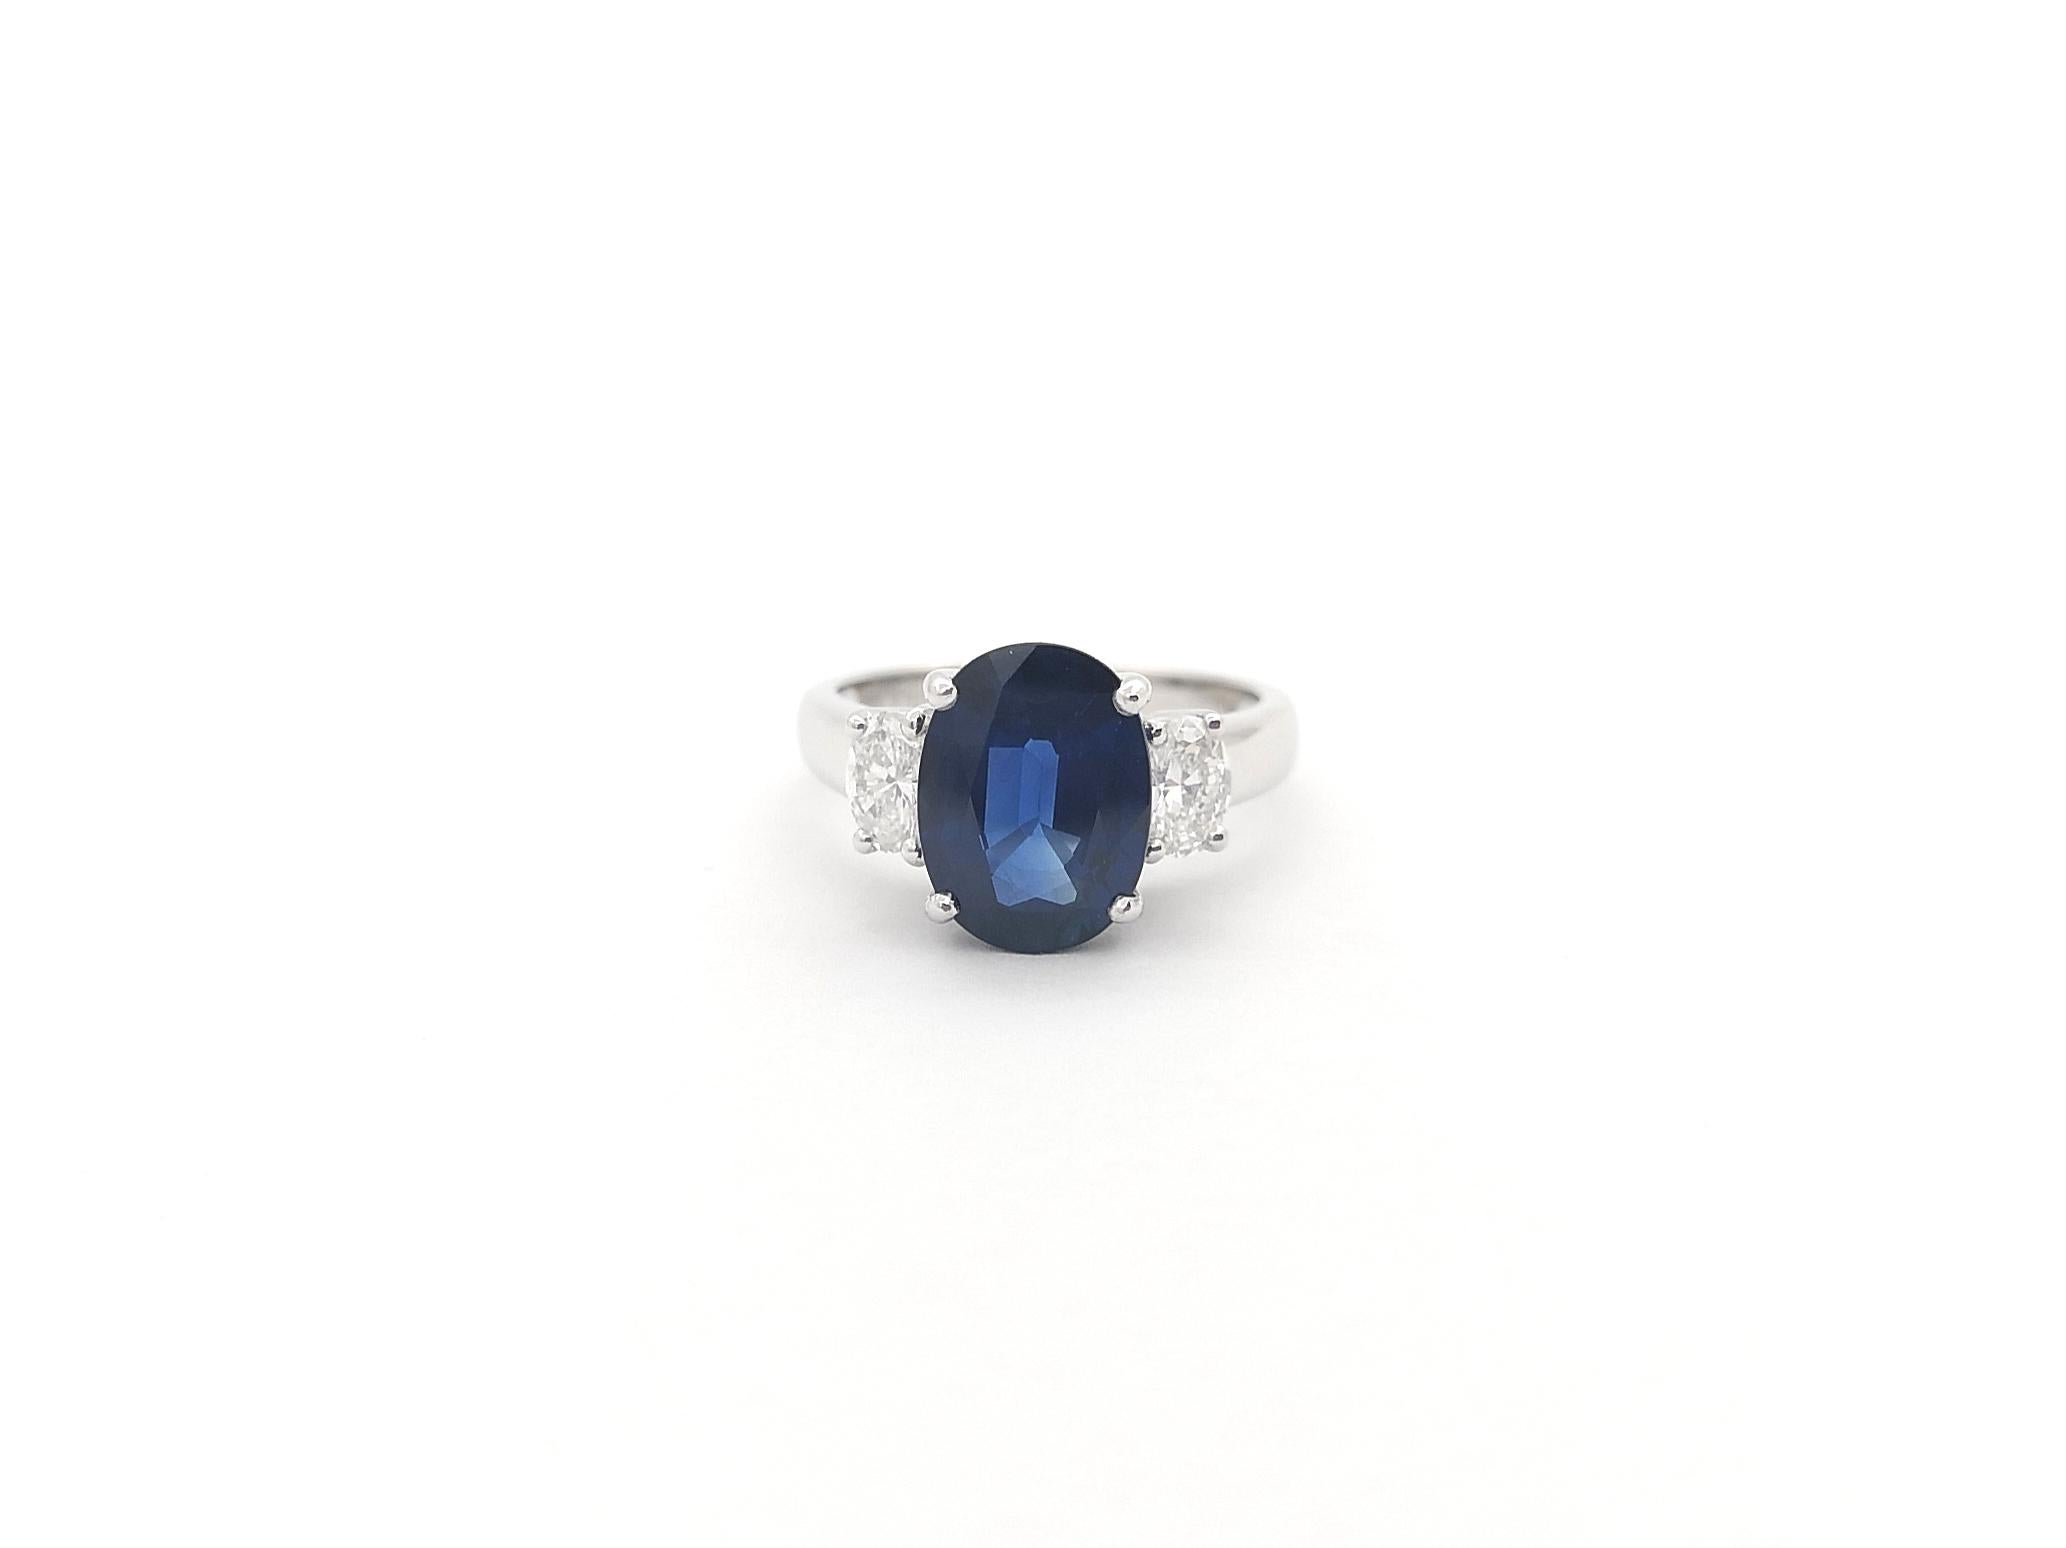 GIA Certified 3.89 cts Blue Sapphire with Diamond Ring set in Platinum 950  For Sale 3